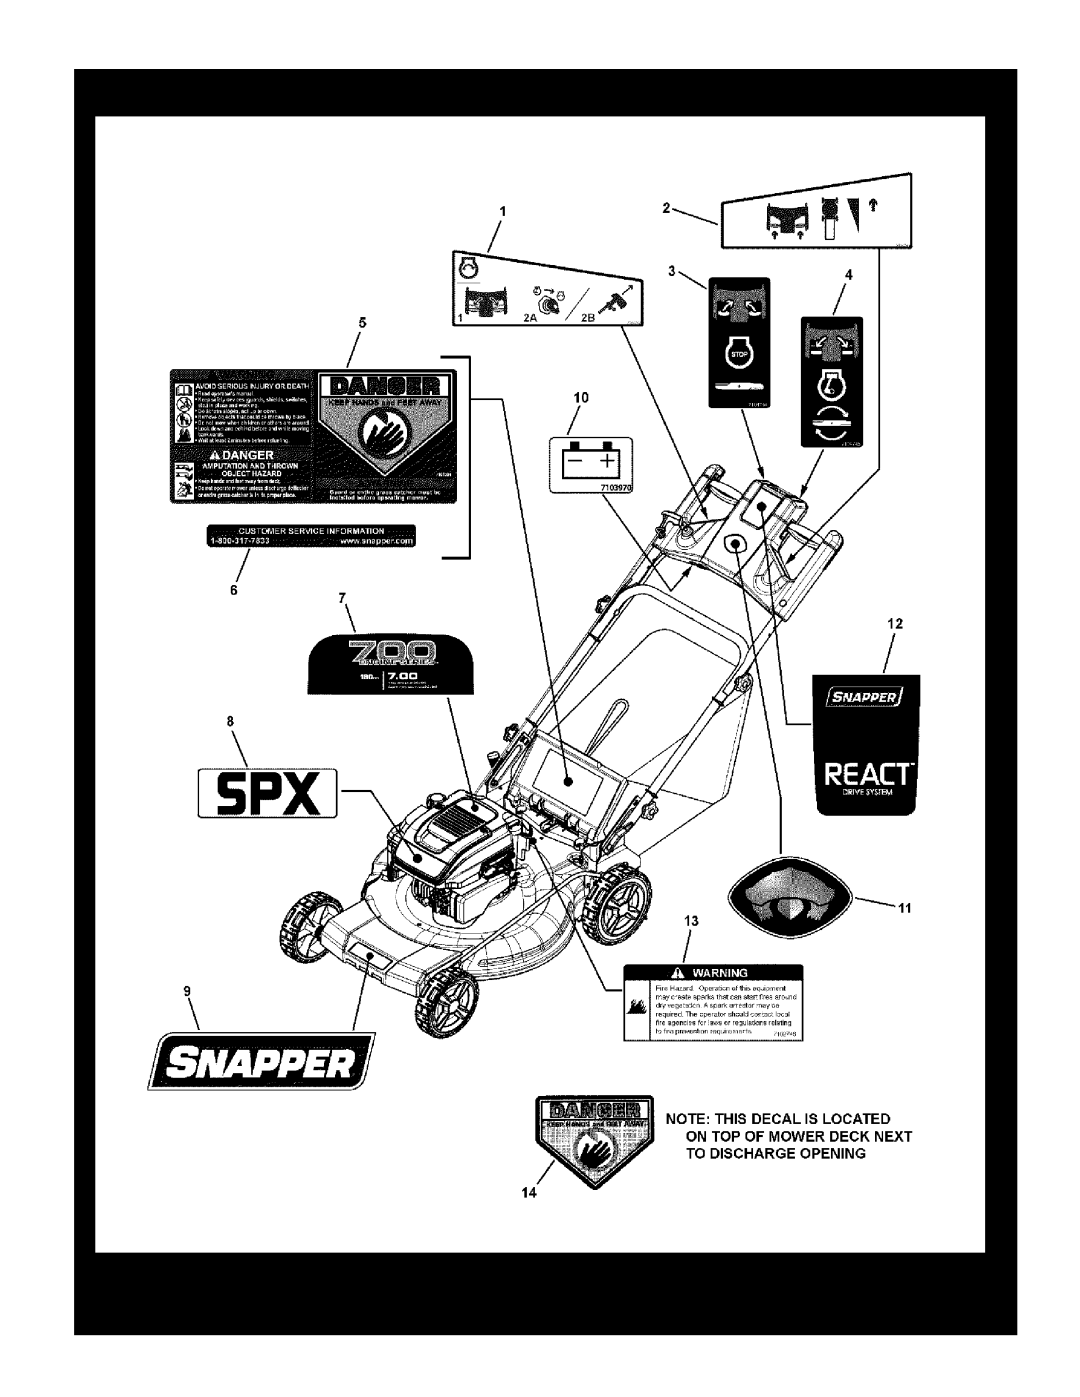 Briggs & Stratton 7800707, 7800756, 7800708, 7800757 manual Decals Group, Reproduction, Manual No, 7104293, VARIABLE SPEED 3N1 